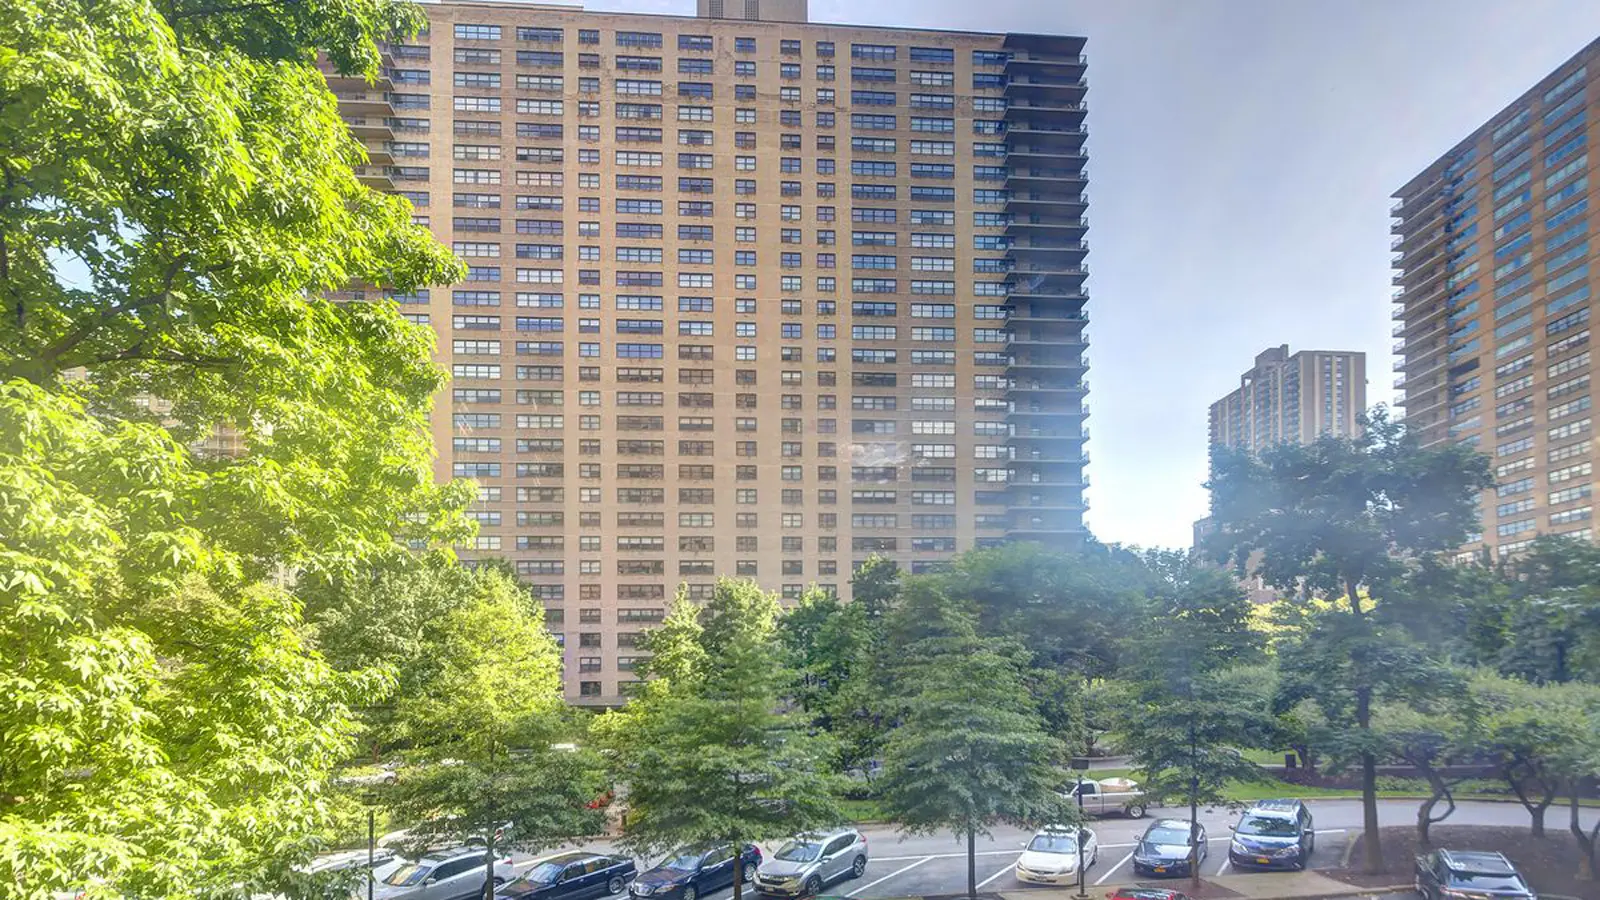 Lincoln Towers, 150 West End Avenue